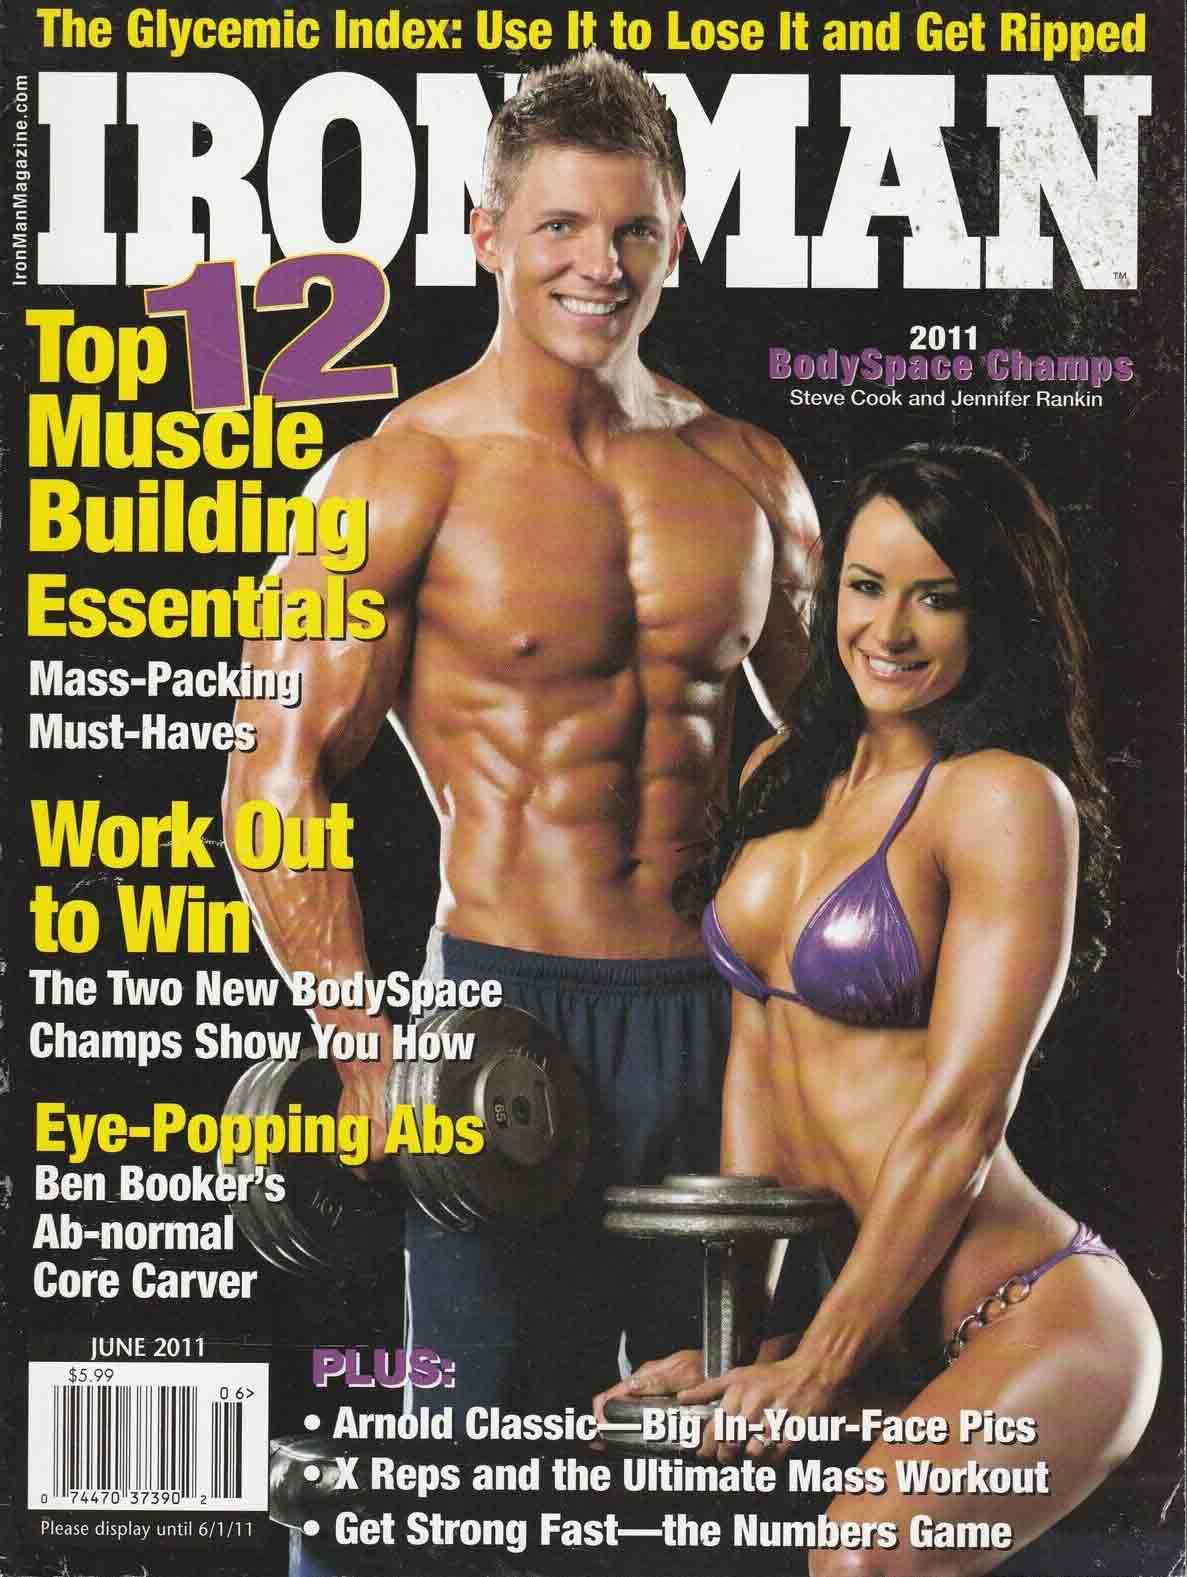 Ironman June 2011 magazine back issue Ironman magizine back copy Ironman June 2011 American magazine Back Issue about bodybuilding, weightlifting, and powerlifting. Published by Iron Man Publishing. The Glycemic Index: Use It To Lose It And Get Ripped.